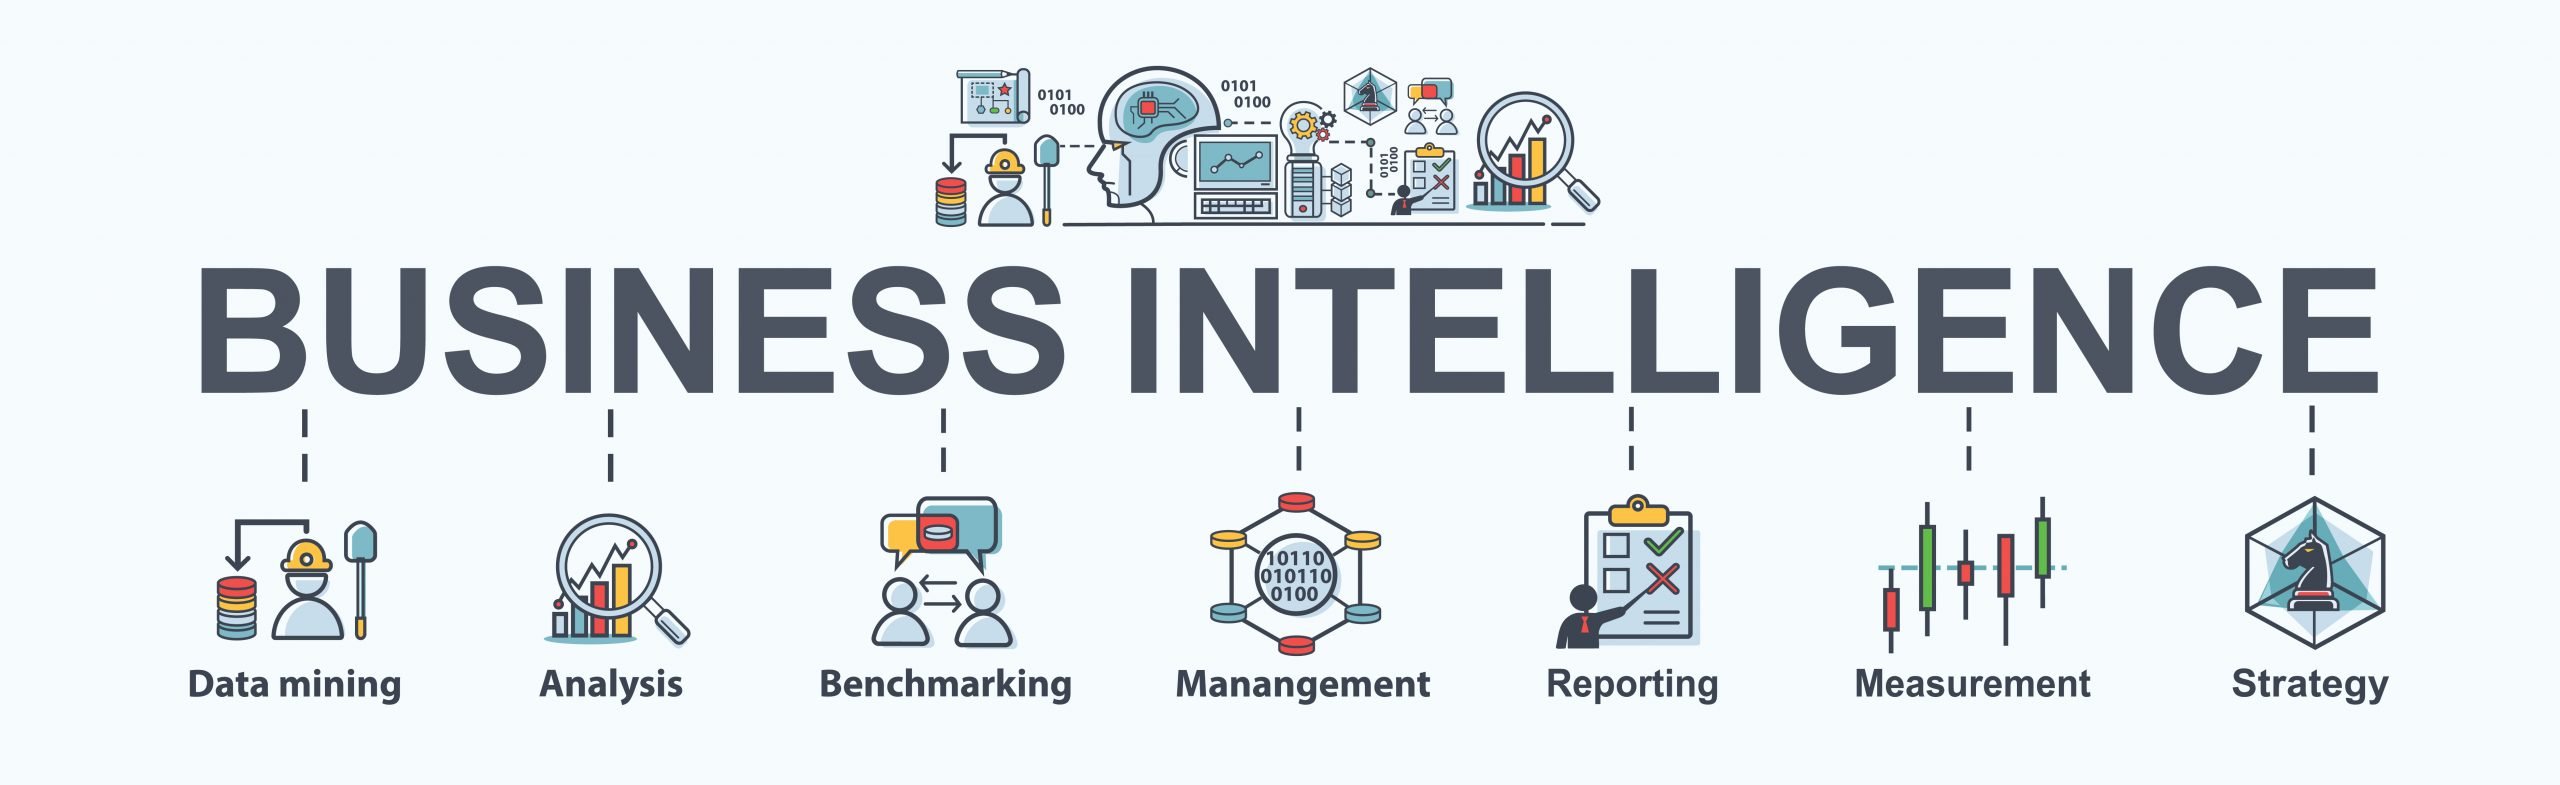 how to become a business intelligence developer?